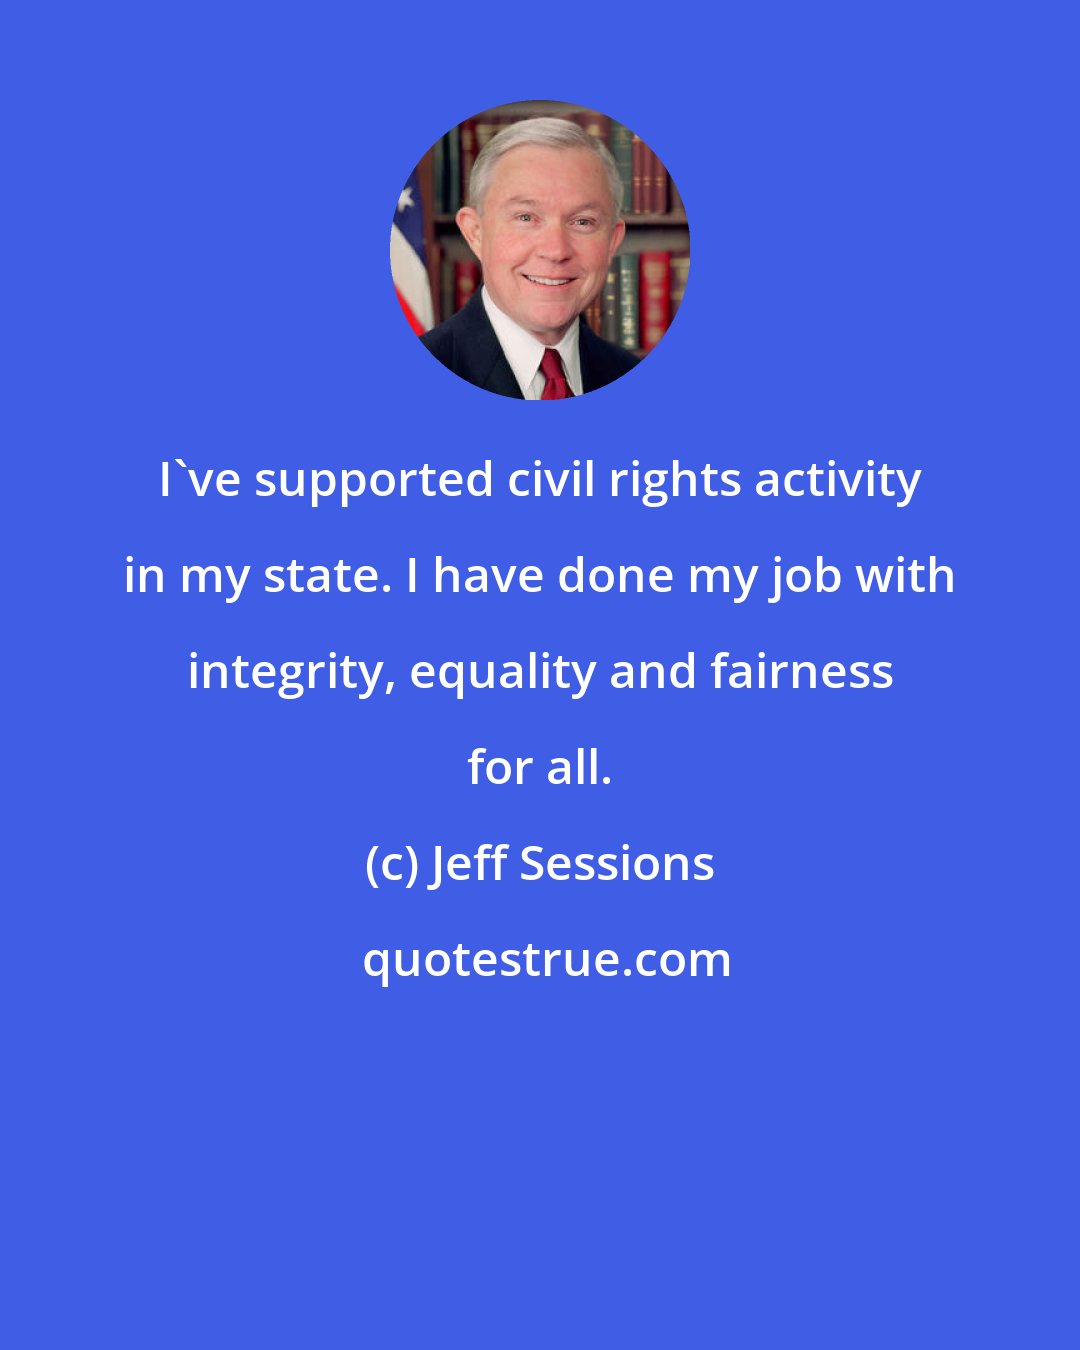 Jeff Sessions: I've supported civil rights activity in my state. I have done my job with integrity, equality and fairness for all.